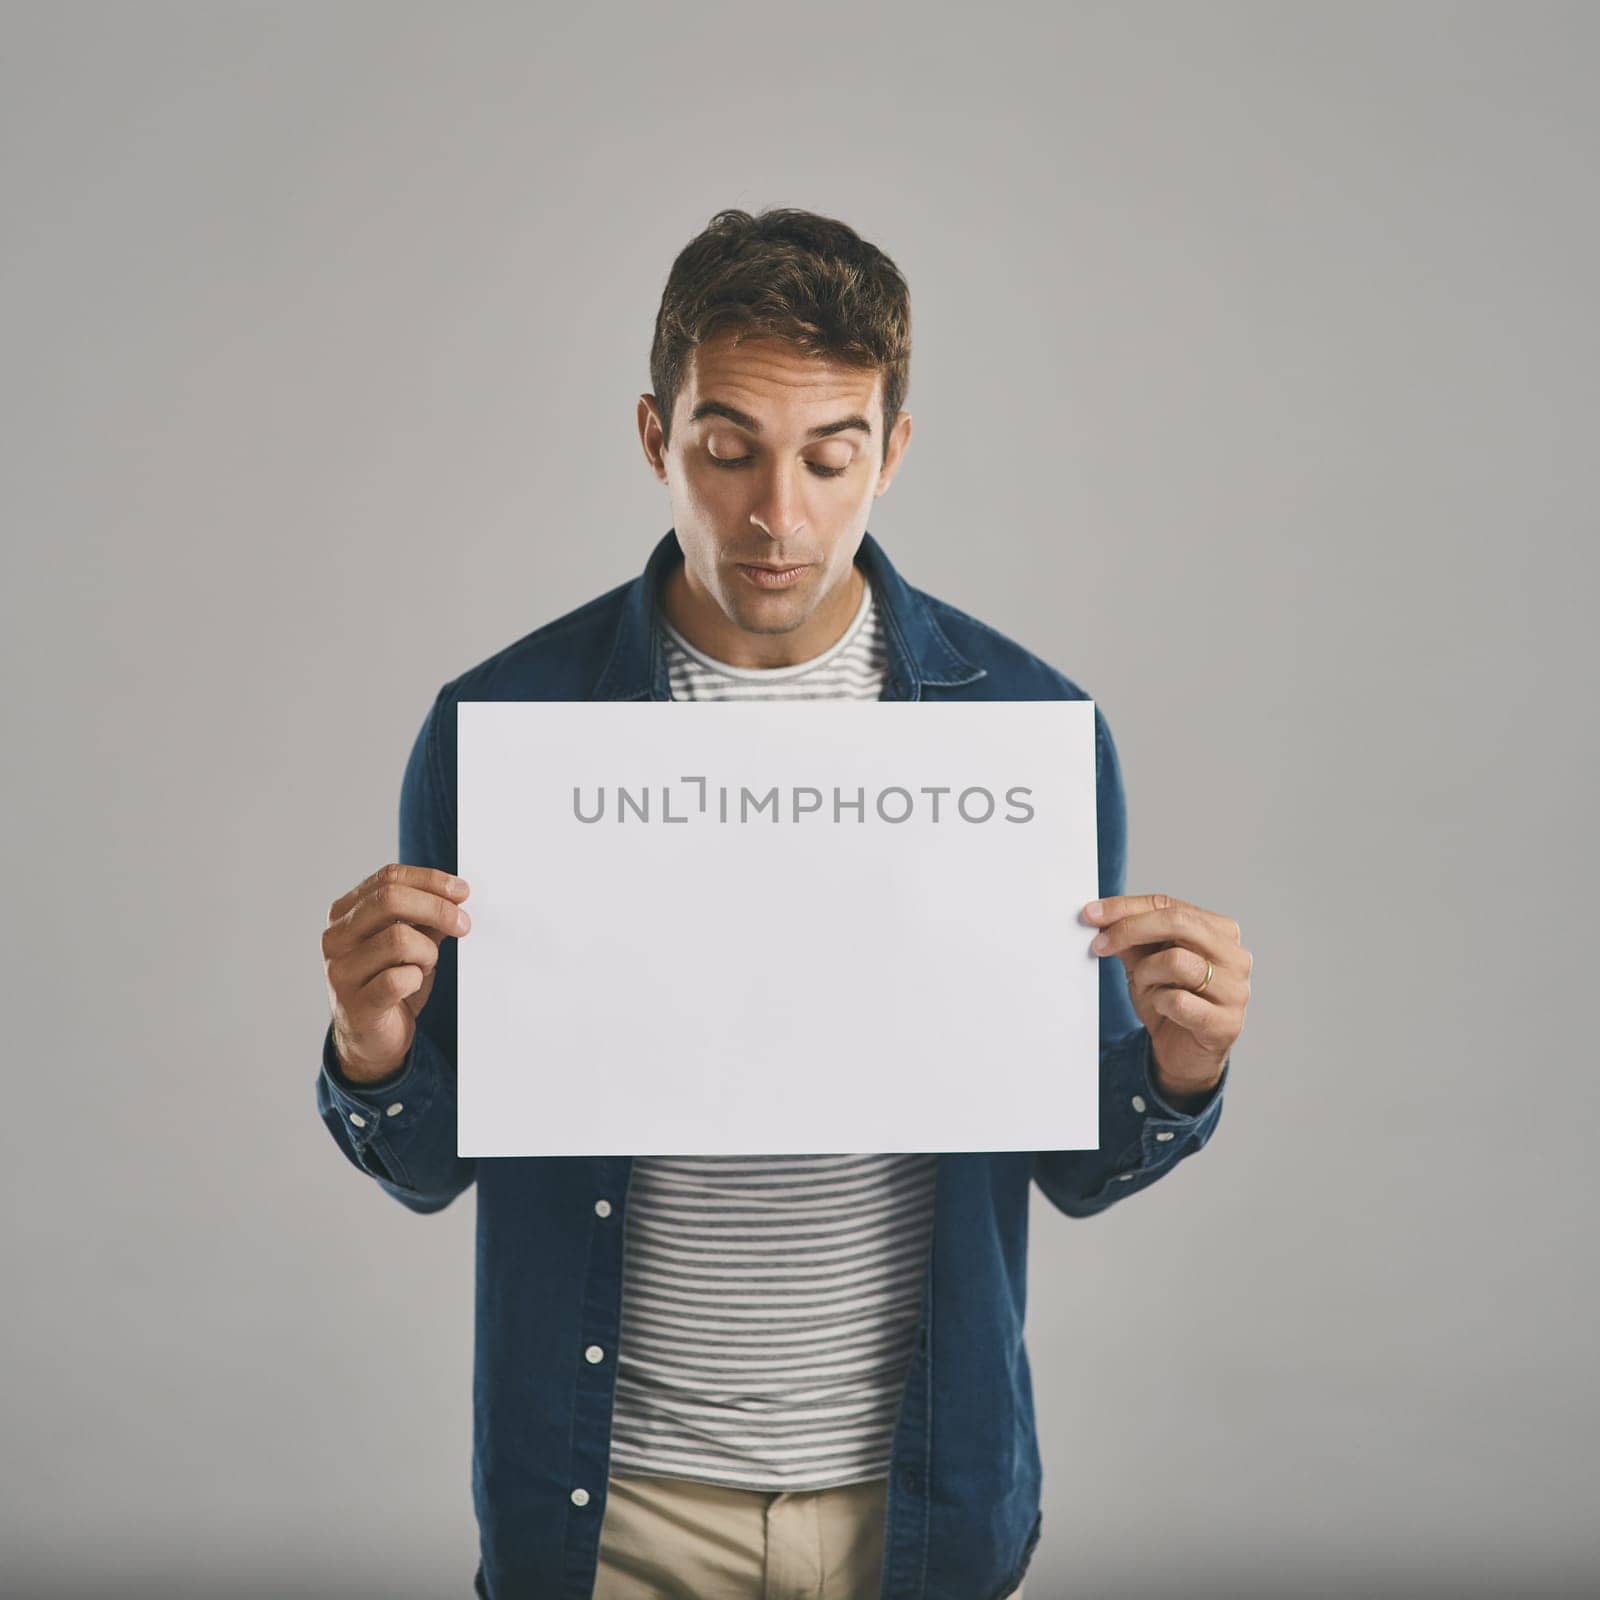 Ooh, what do we have here...Studio shot of a young man holding a blank placard against a grey background